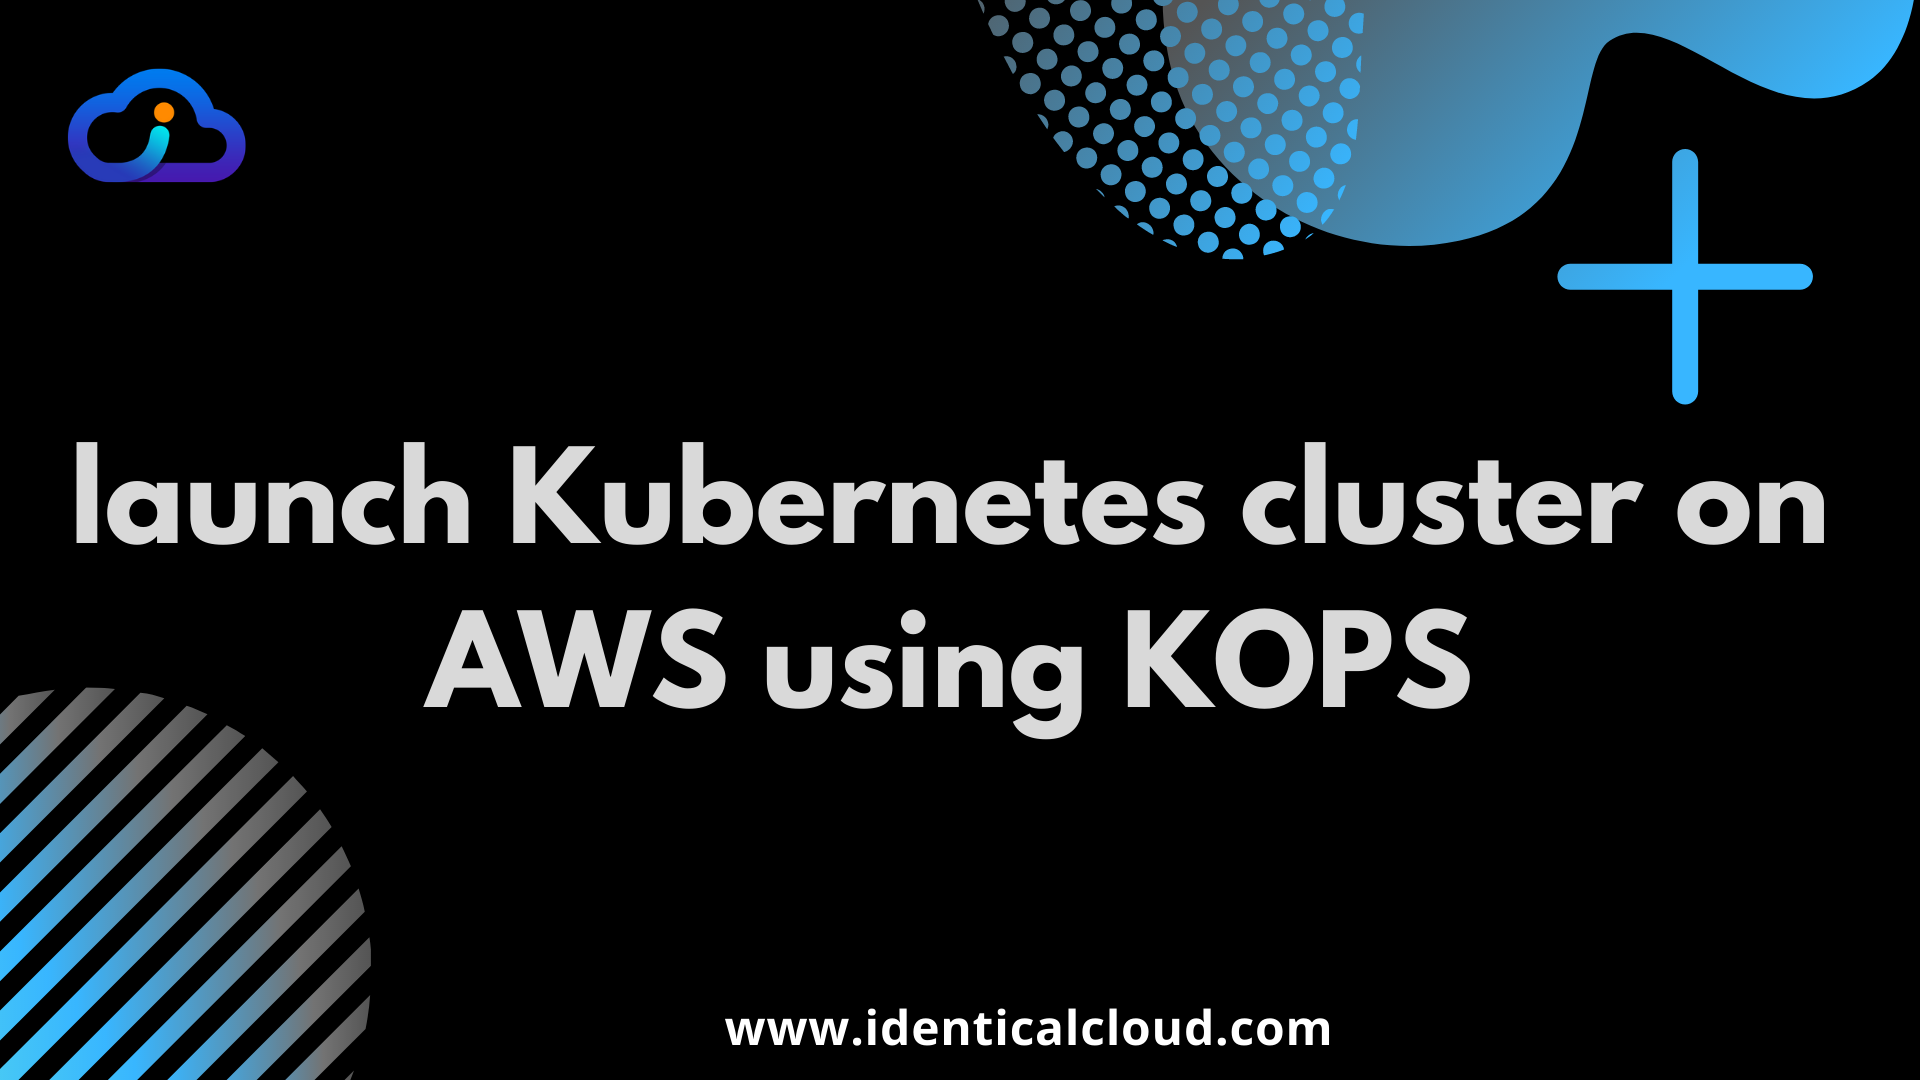 launch Kubernetes cluster on AWS using KOPS